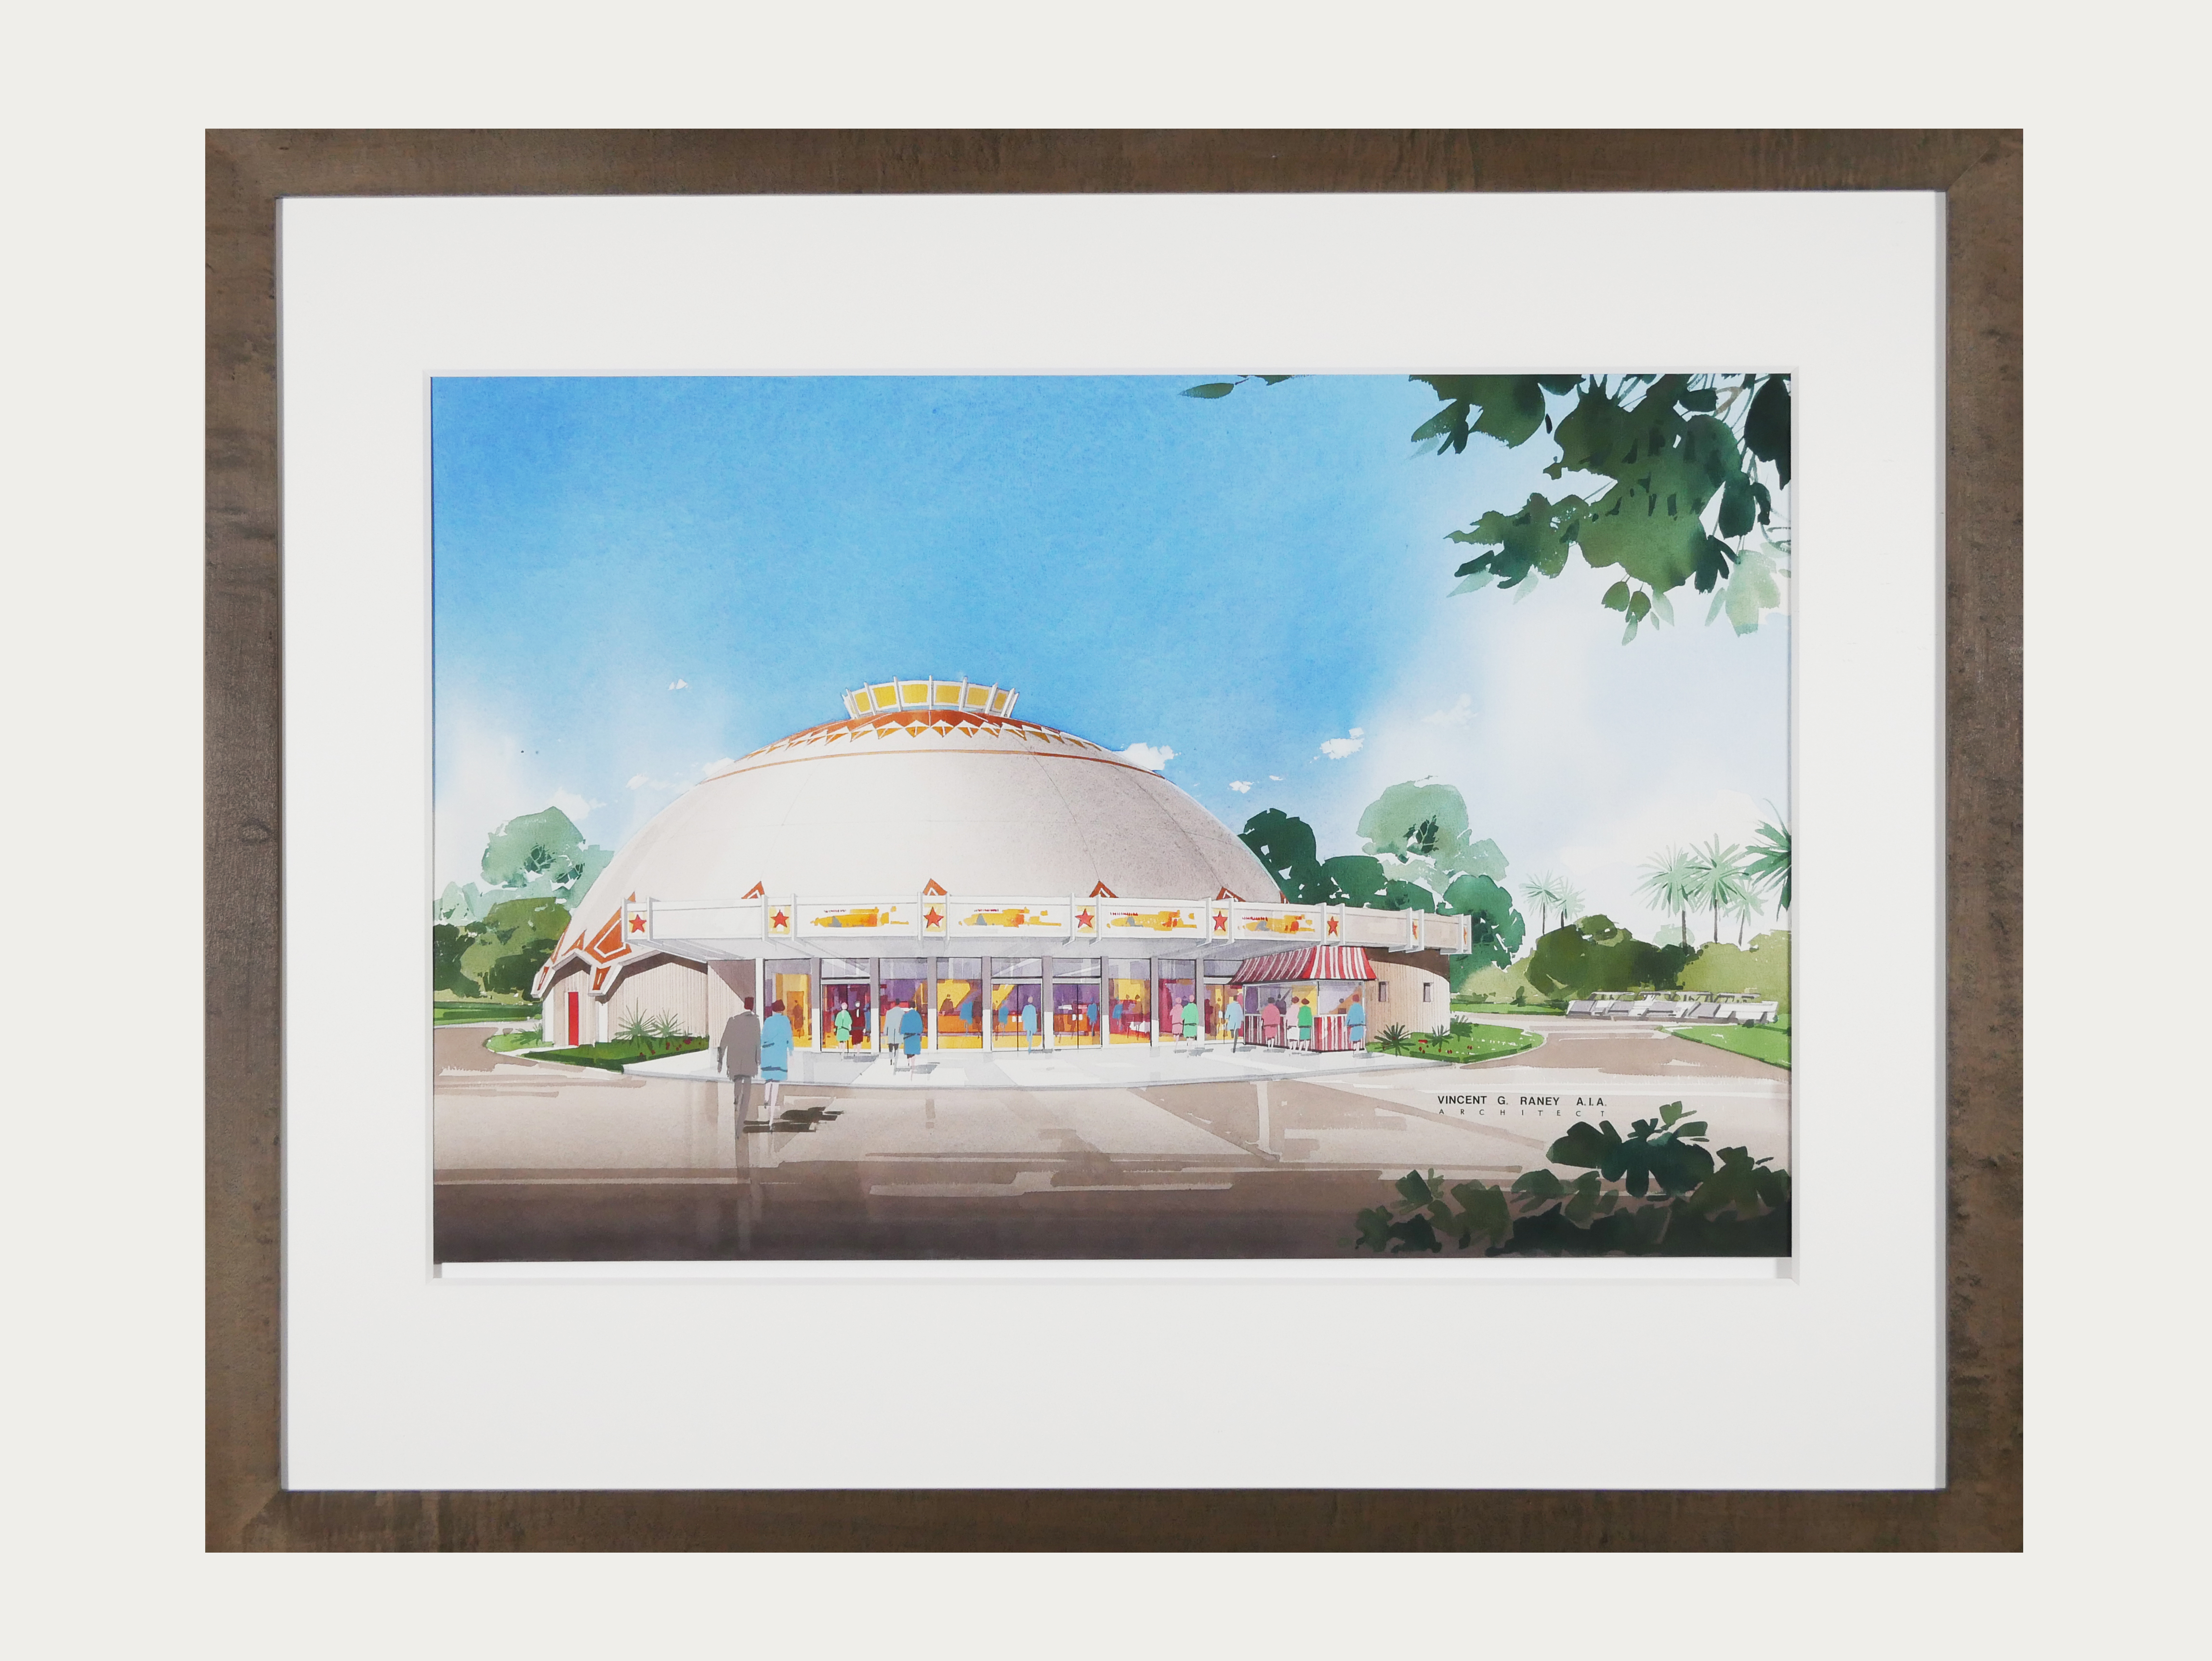 Watercolor rendering of Vincent Raney’s single dome theater for the Syufy theater chain